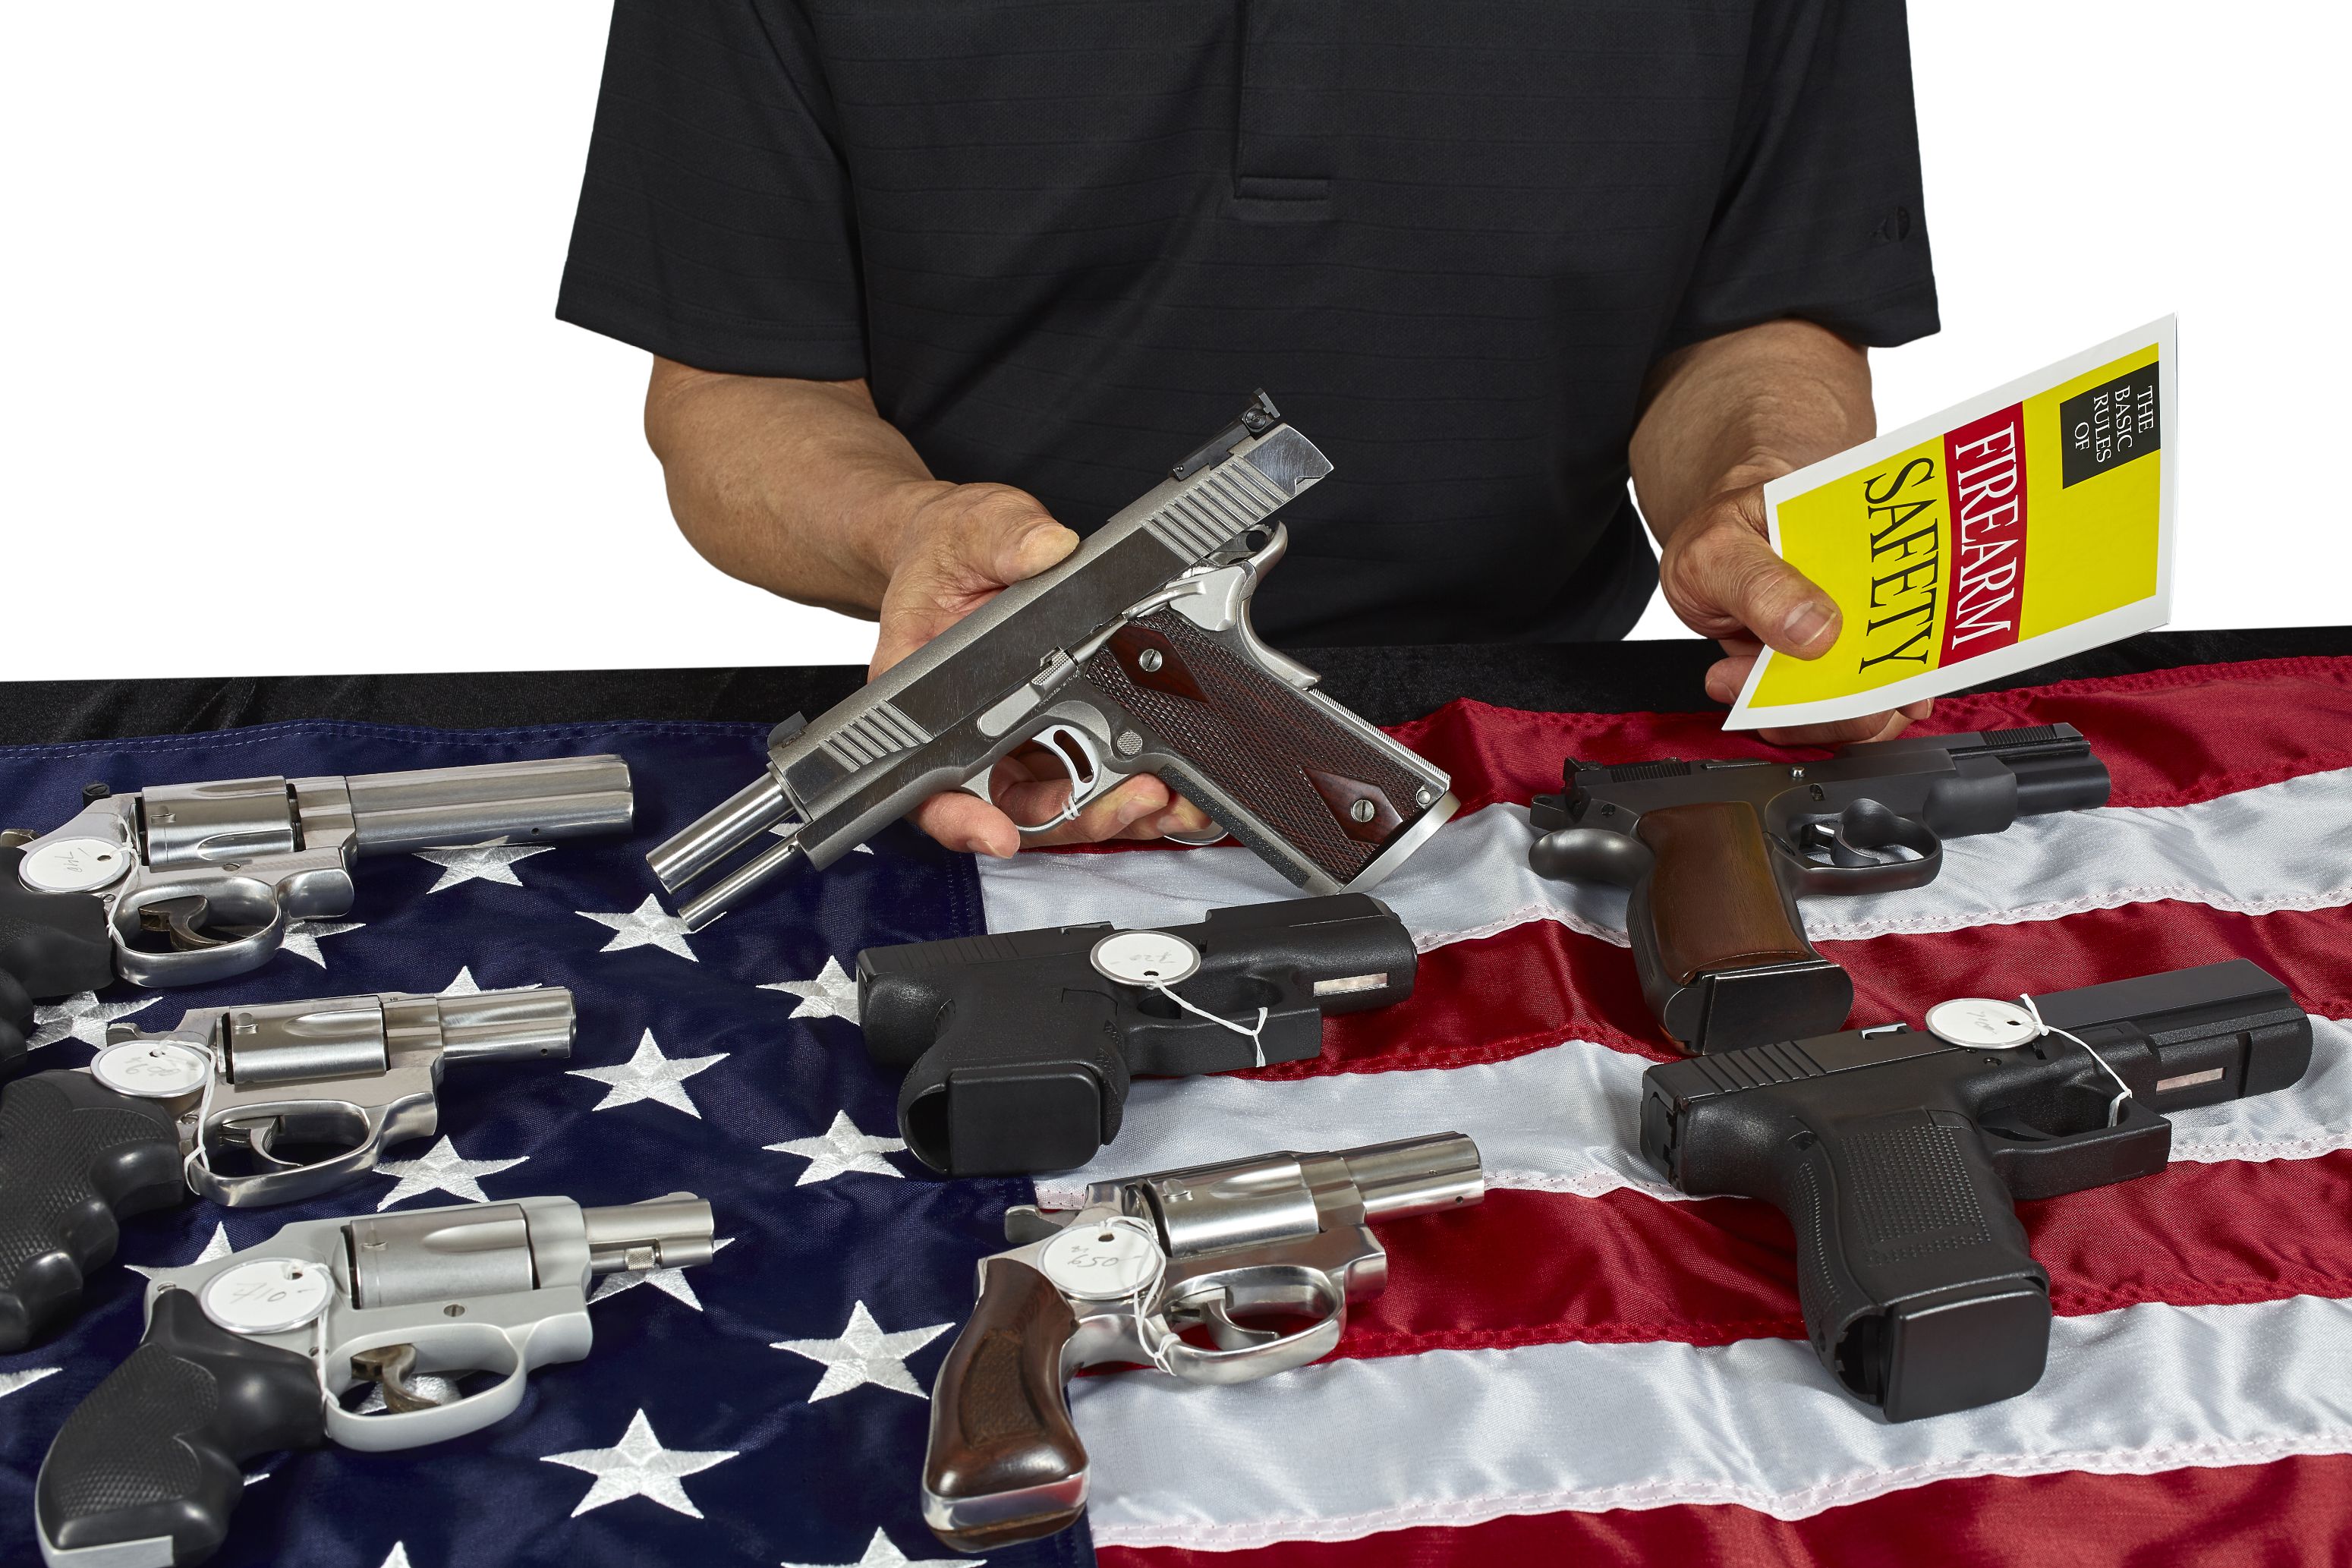 Pistols and revolver assorted firearms for sale on USA America flag at gun show